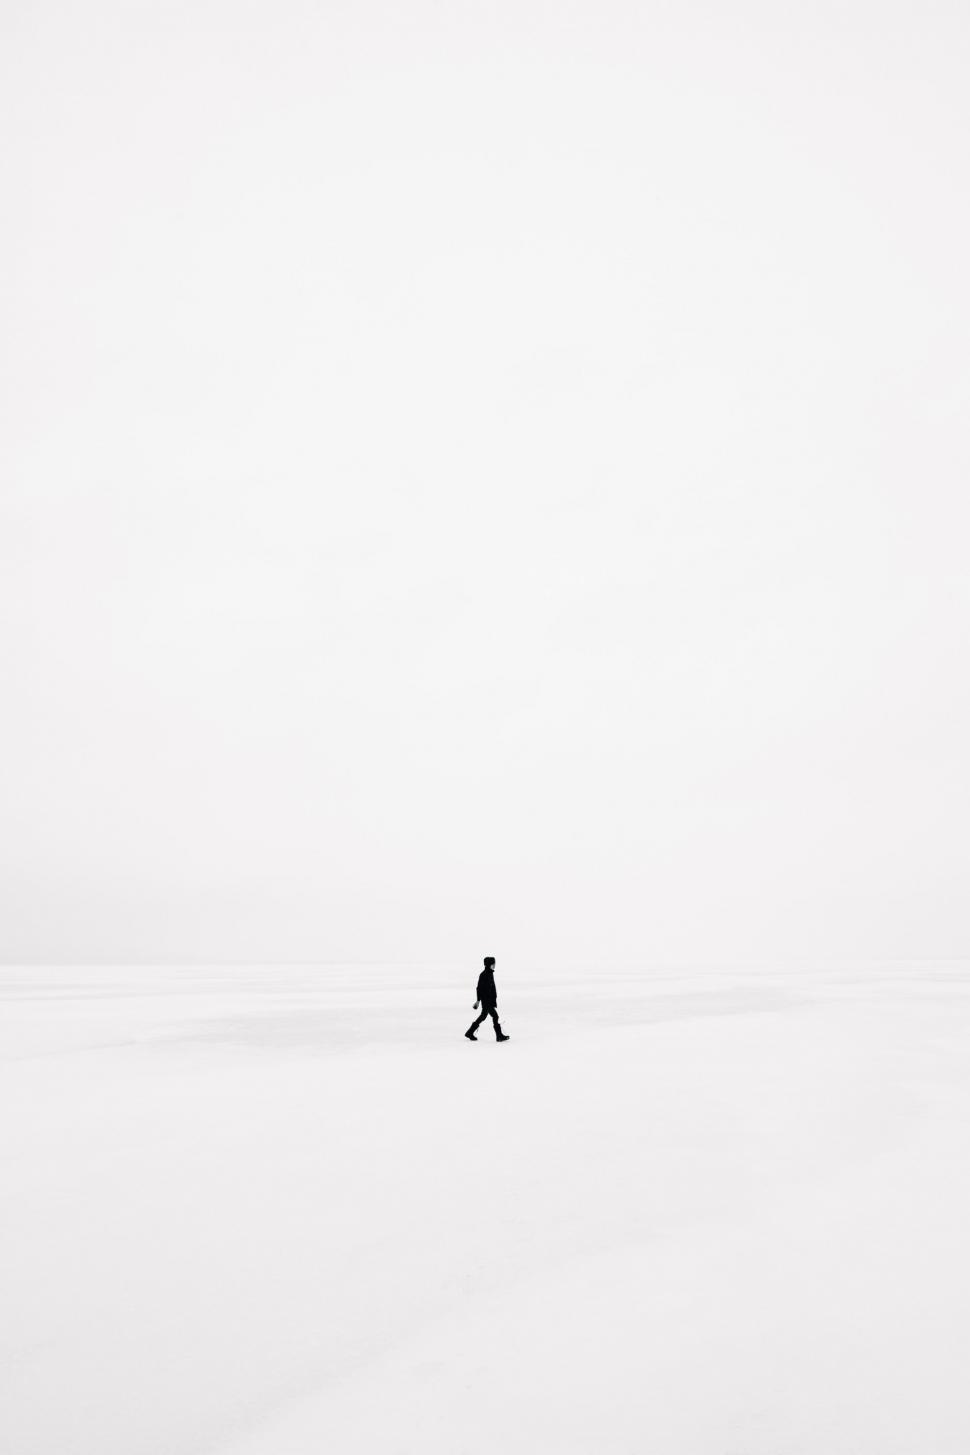 Free Image of Person Walking Across Snow Covered Field 